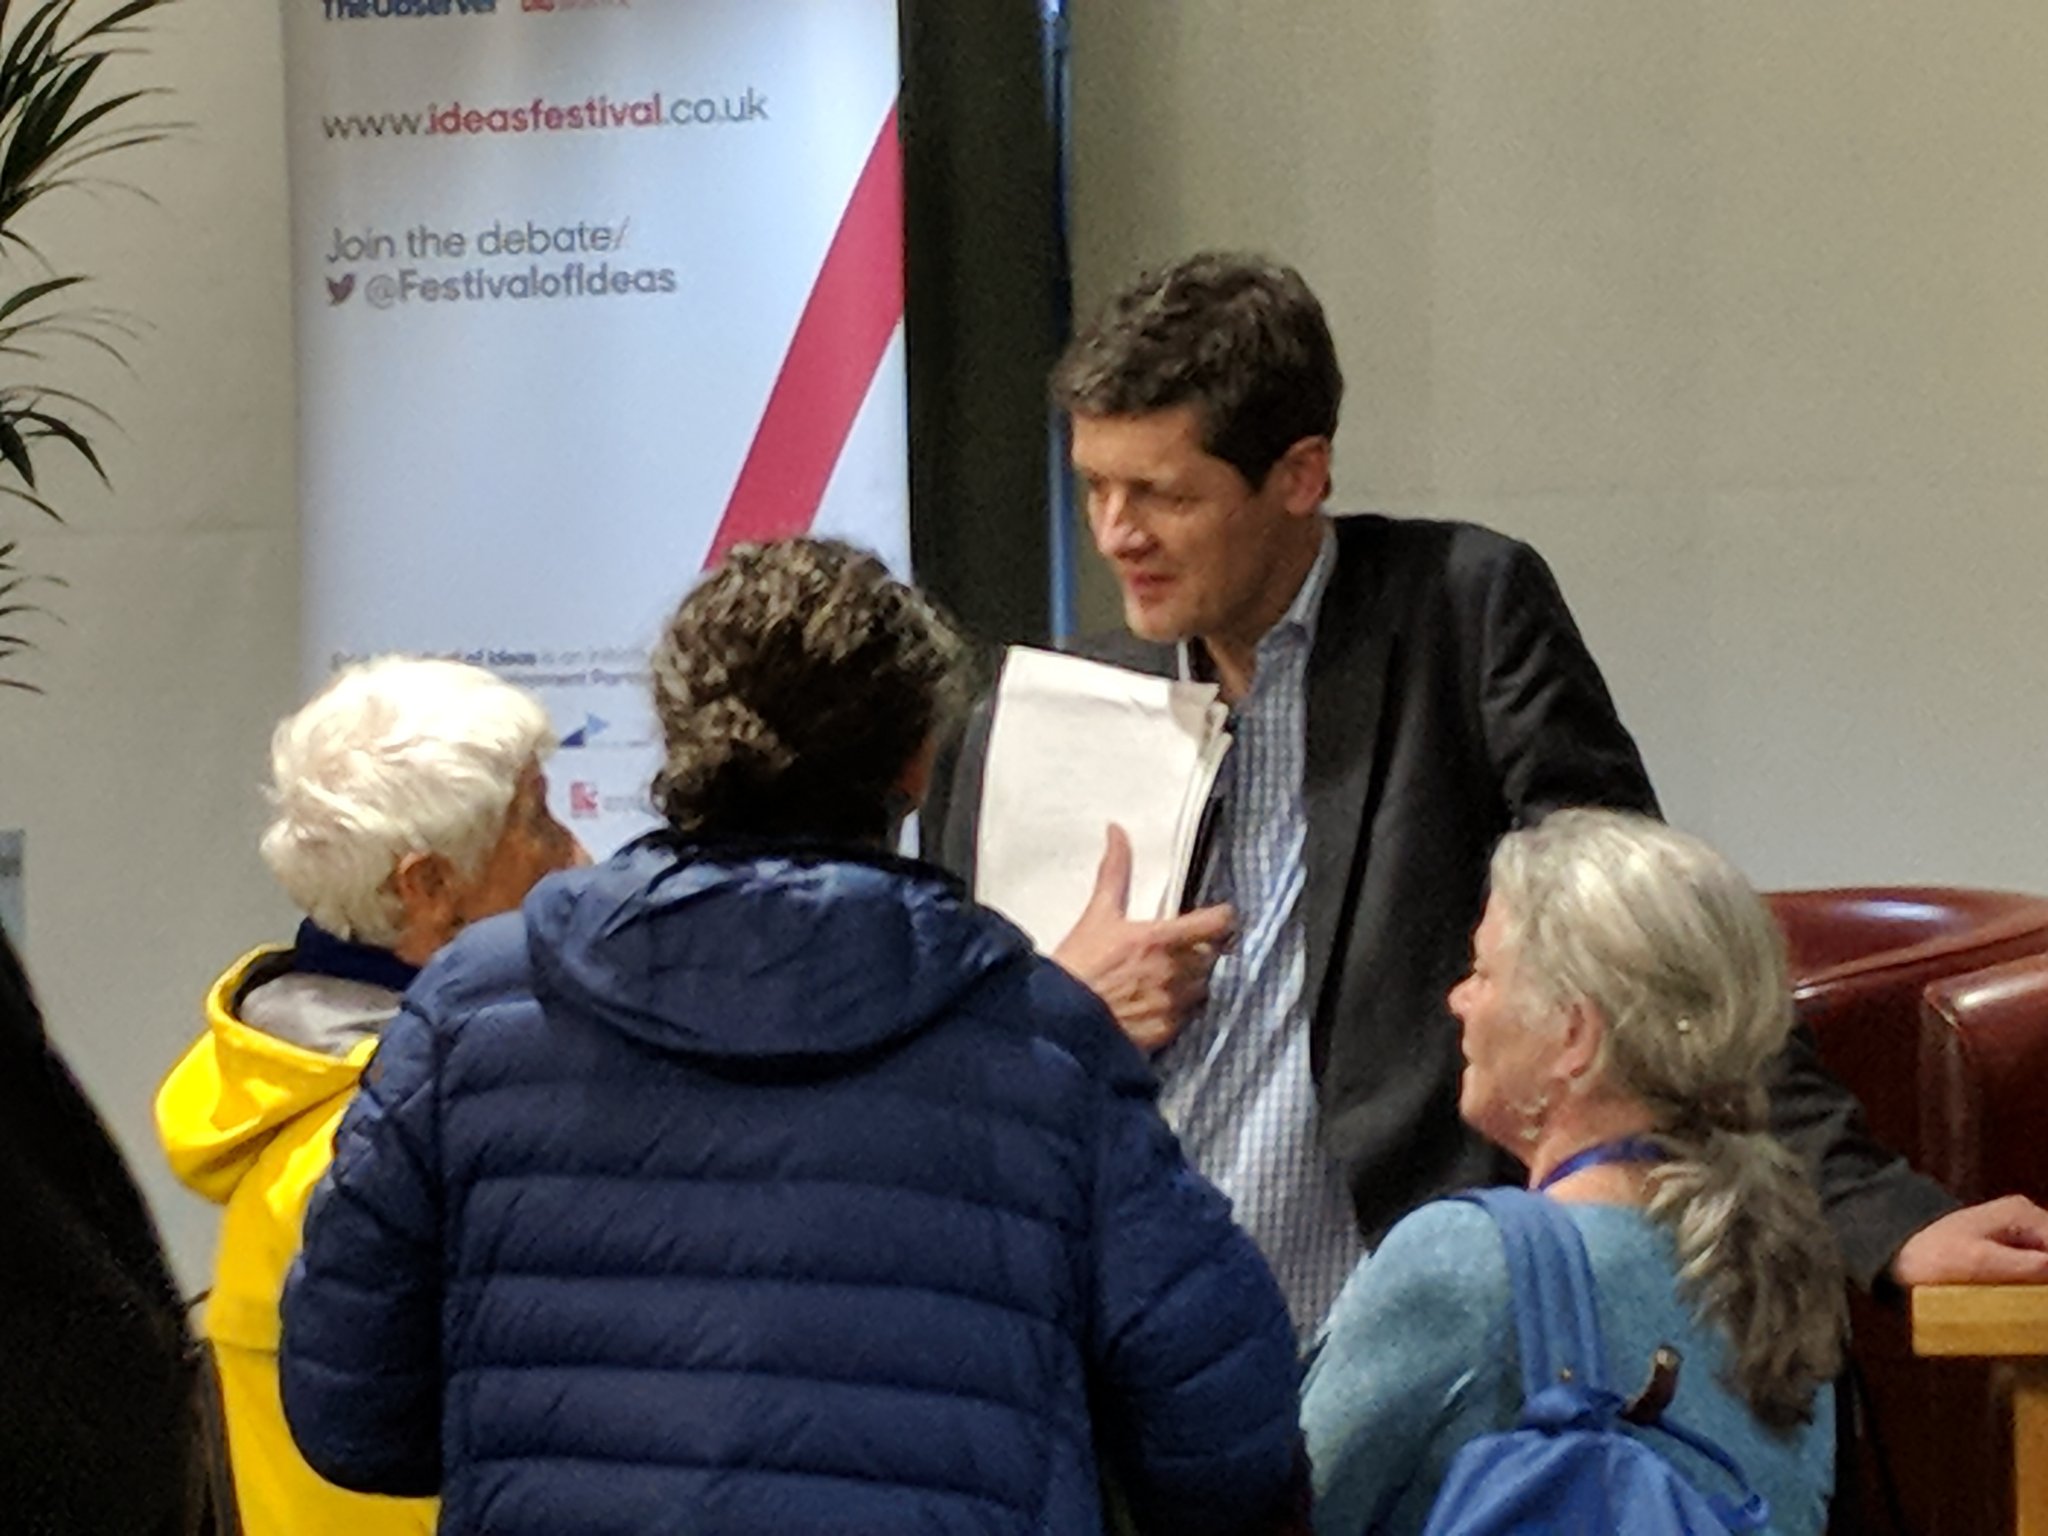 As ever @BBCHughPym mobbed by fans after NHS panel at #economicsfest https://t.co/dnAM6BB1az